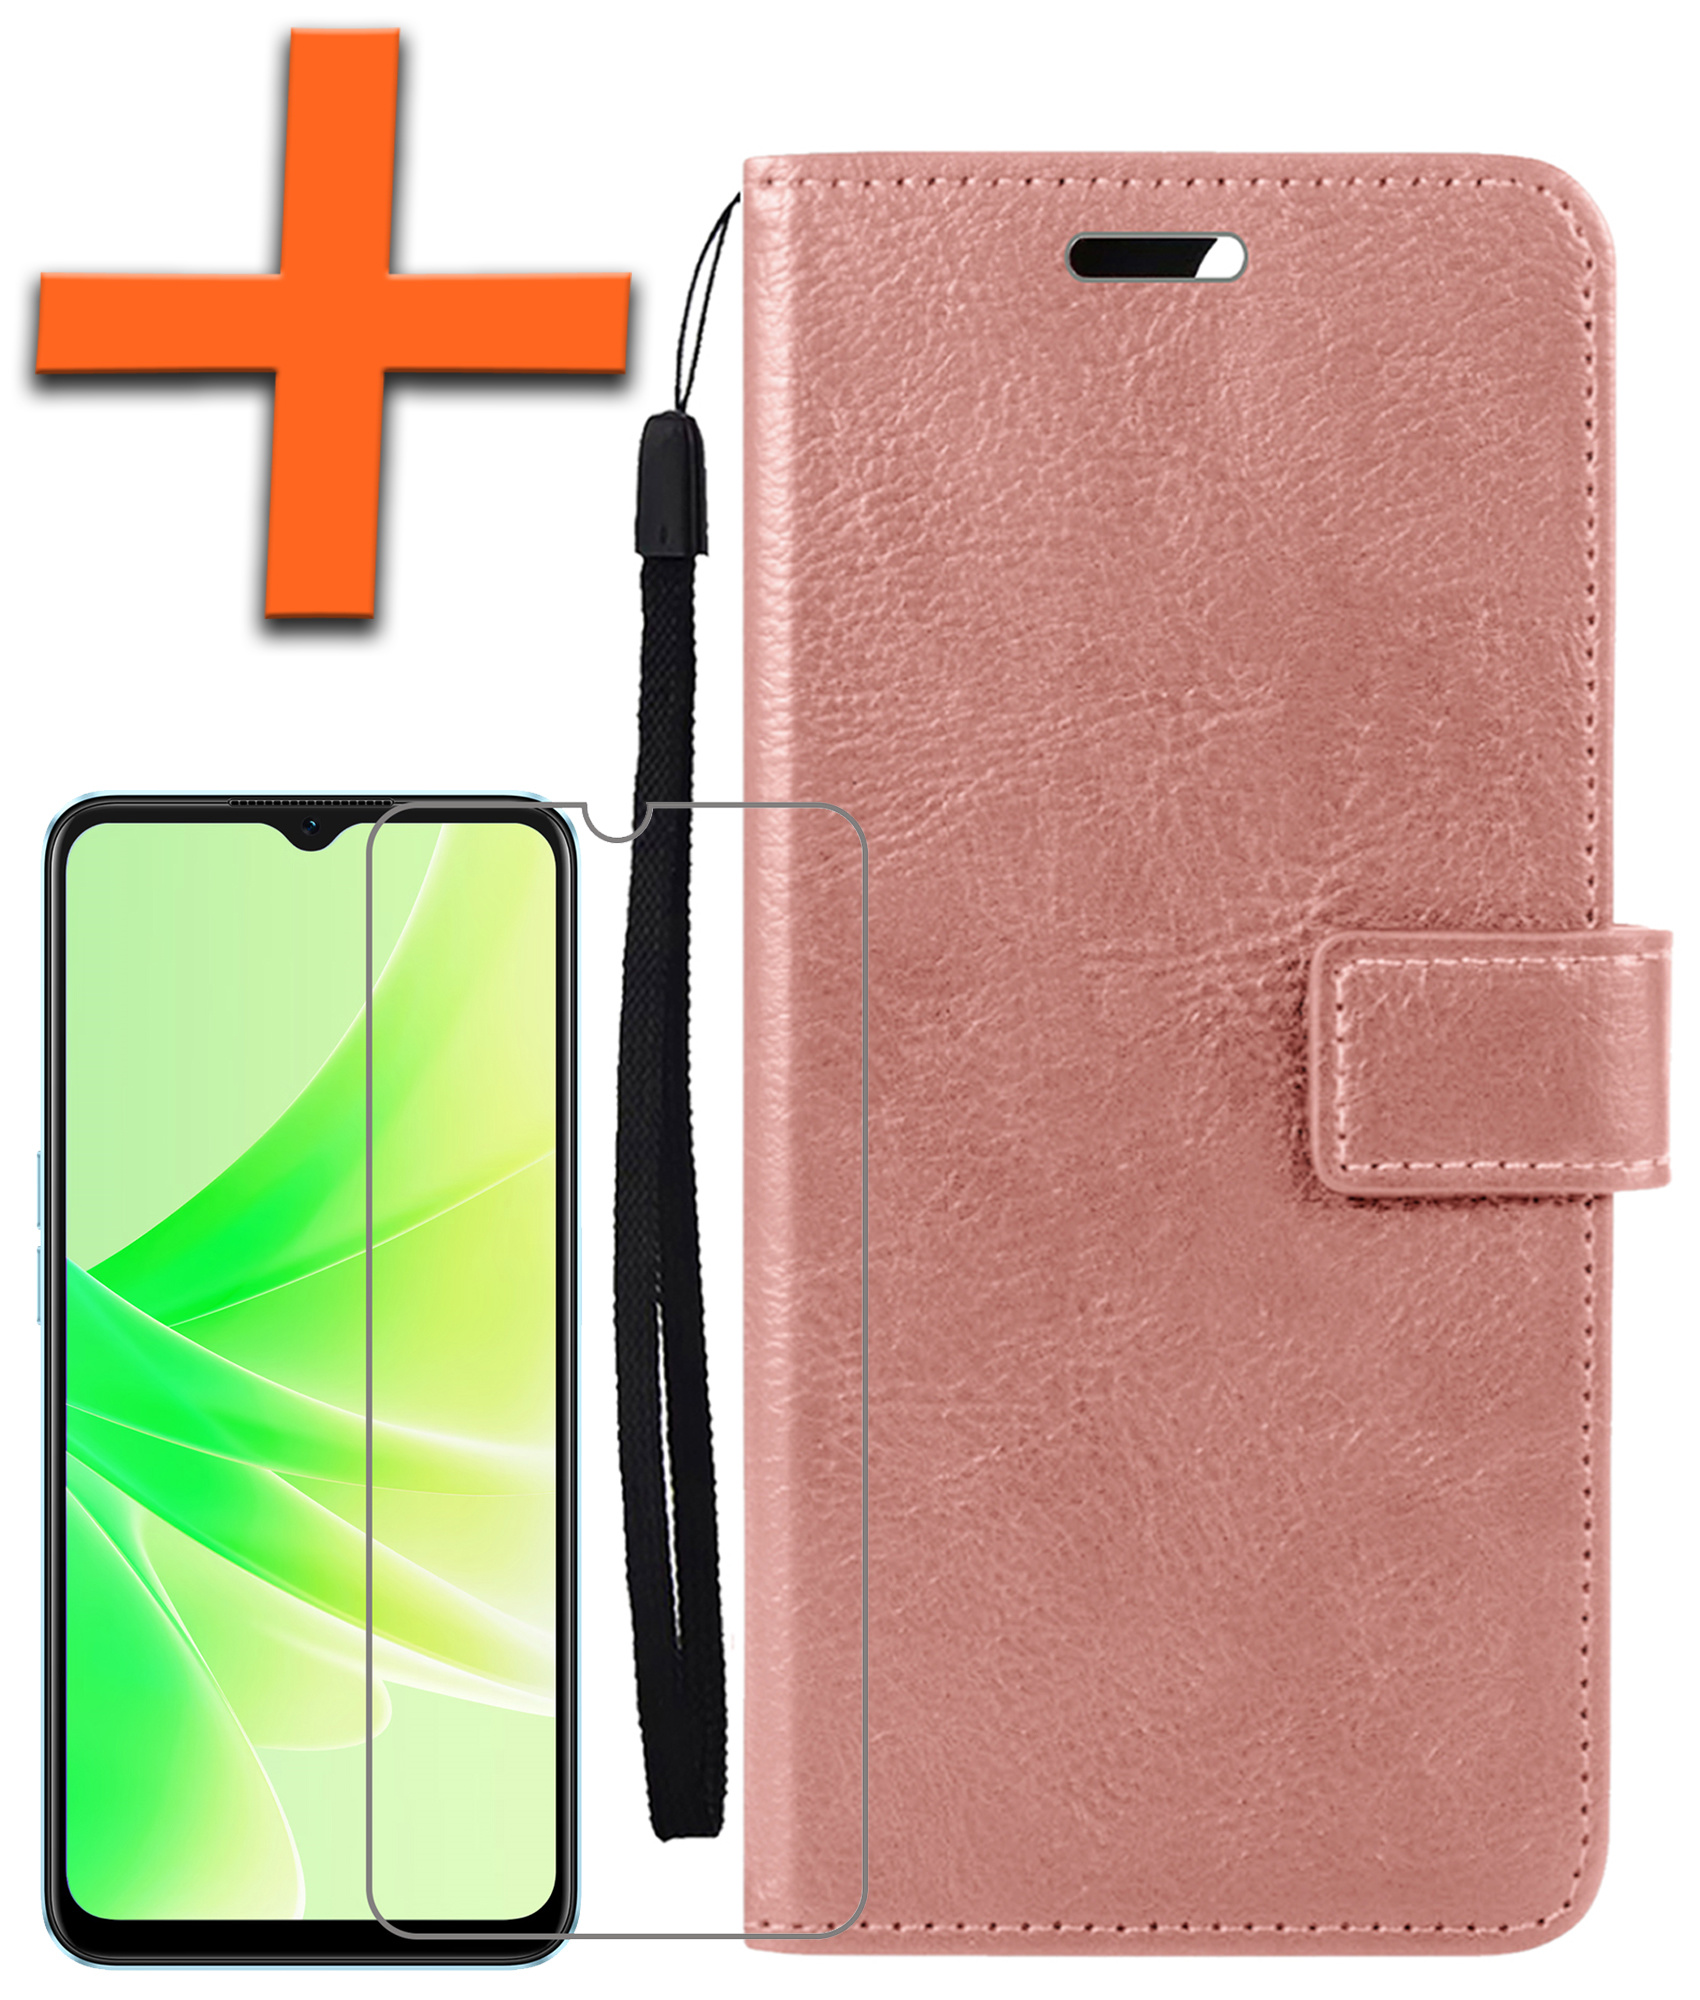 Nomfy OPPO A57s Hoes Bookcase Flipcase Book Cover Met Screenprotector - OPPO A57s Hoesje Book Case - Rose Goud